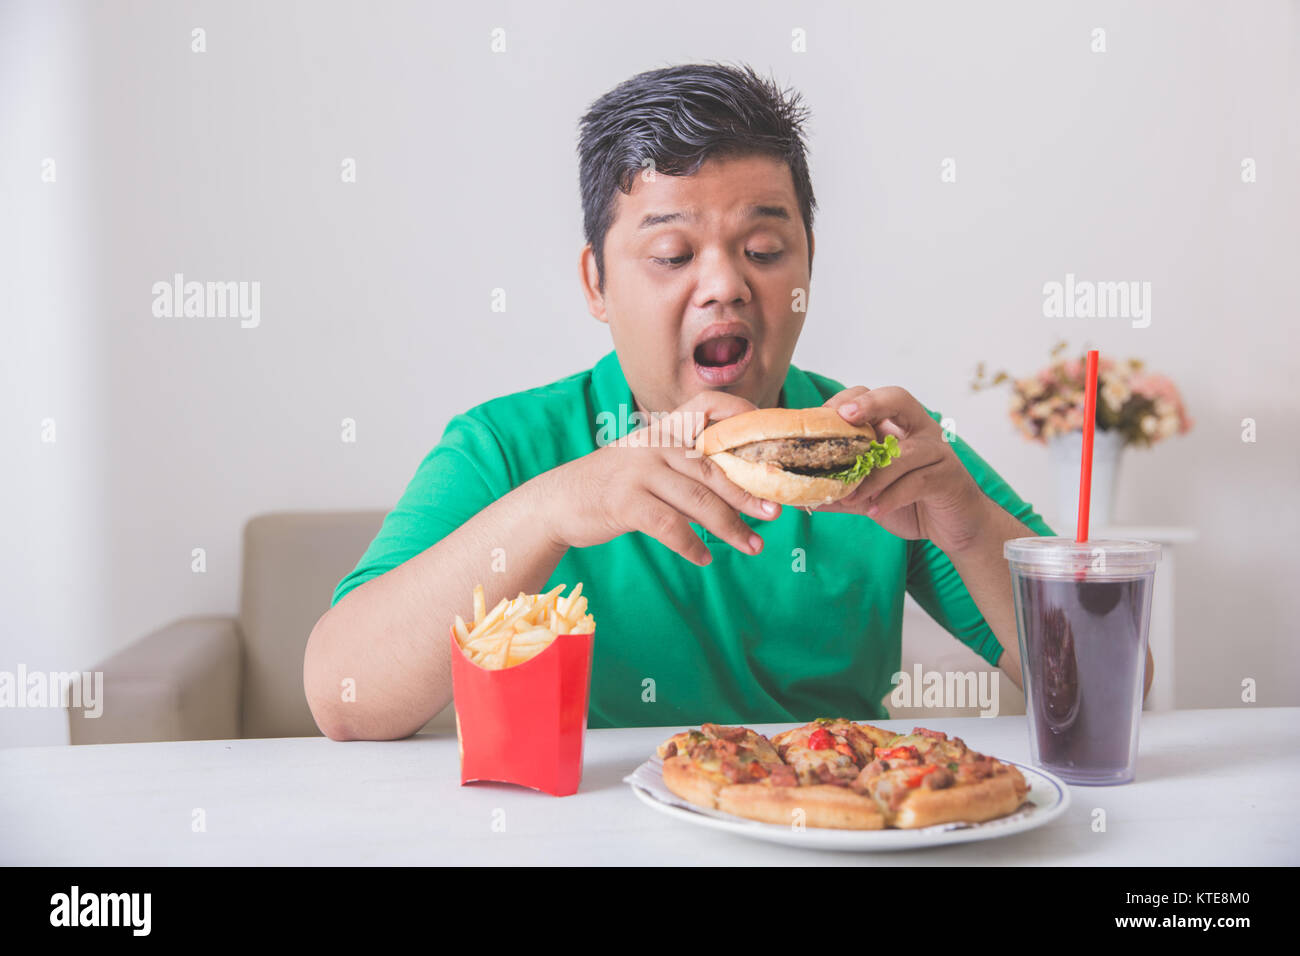 Obese Man Eating Junk Food Stock Photo Alamy